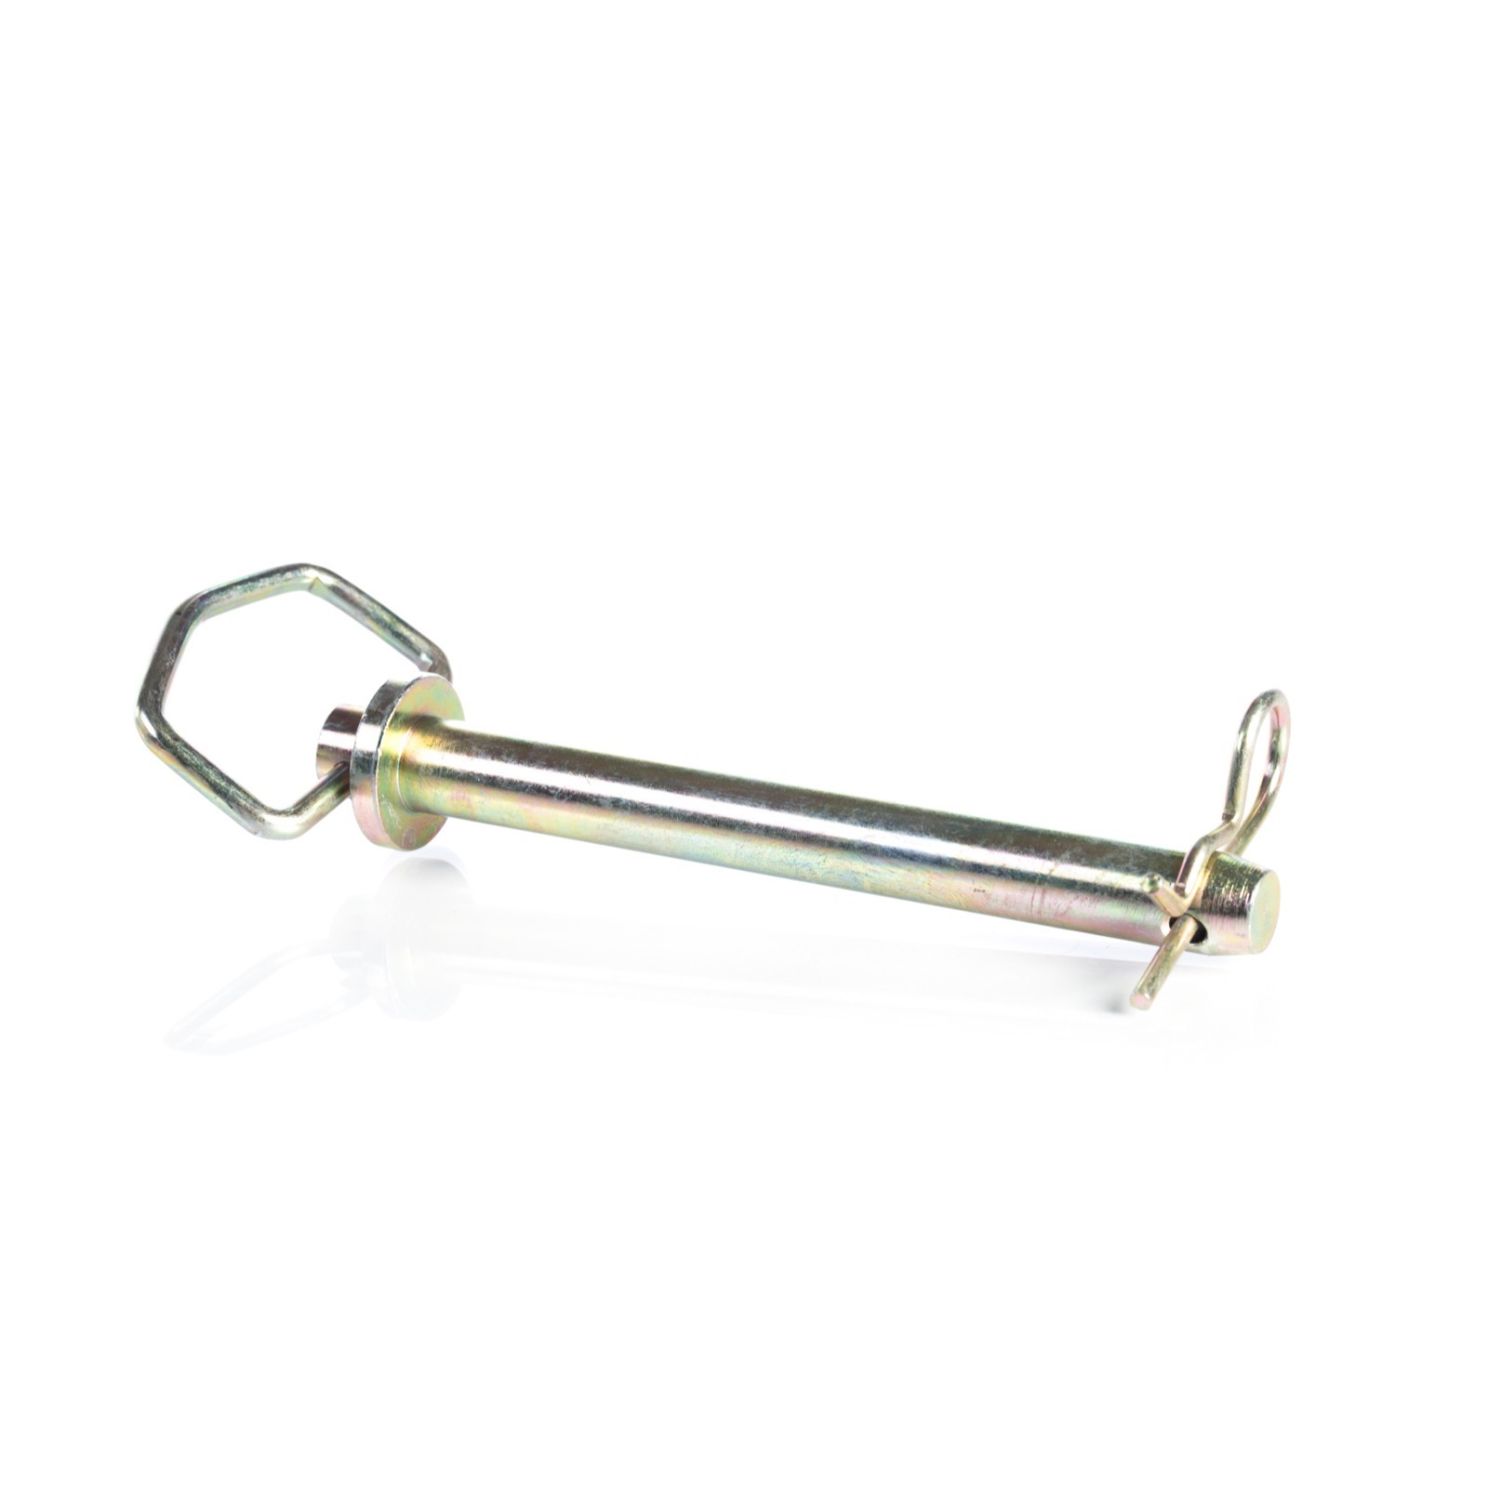 3/4" x 6-1/4" Cold Forged Hitch Pin